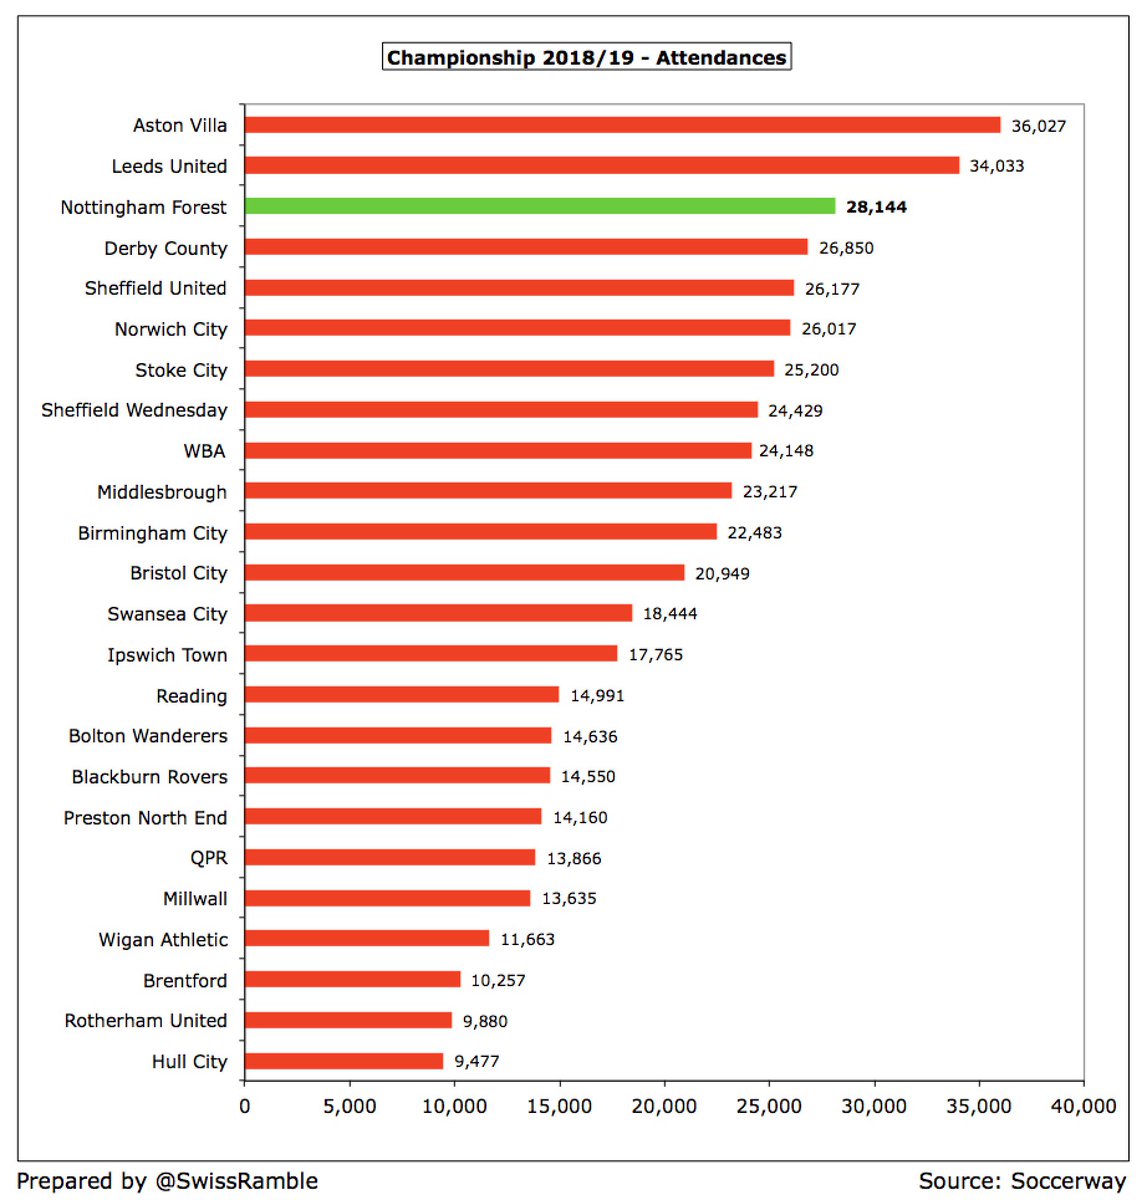 In fact,  #NFFC 28,144 attendance was 3rd highest in the Championship, only beaten by  #AVFC 36,027 and  #LUFC 34,033. Ticket prices were frozen in 2018/19, including some positive ticket pricing initiatives, e.g. free/cheap tickets for young fans, but some small rises in 2019/20.